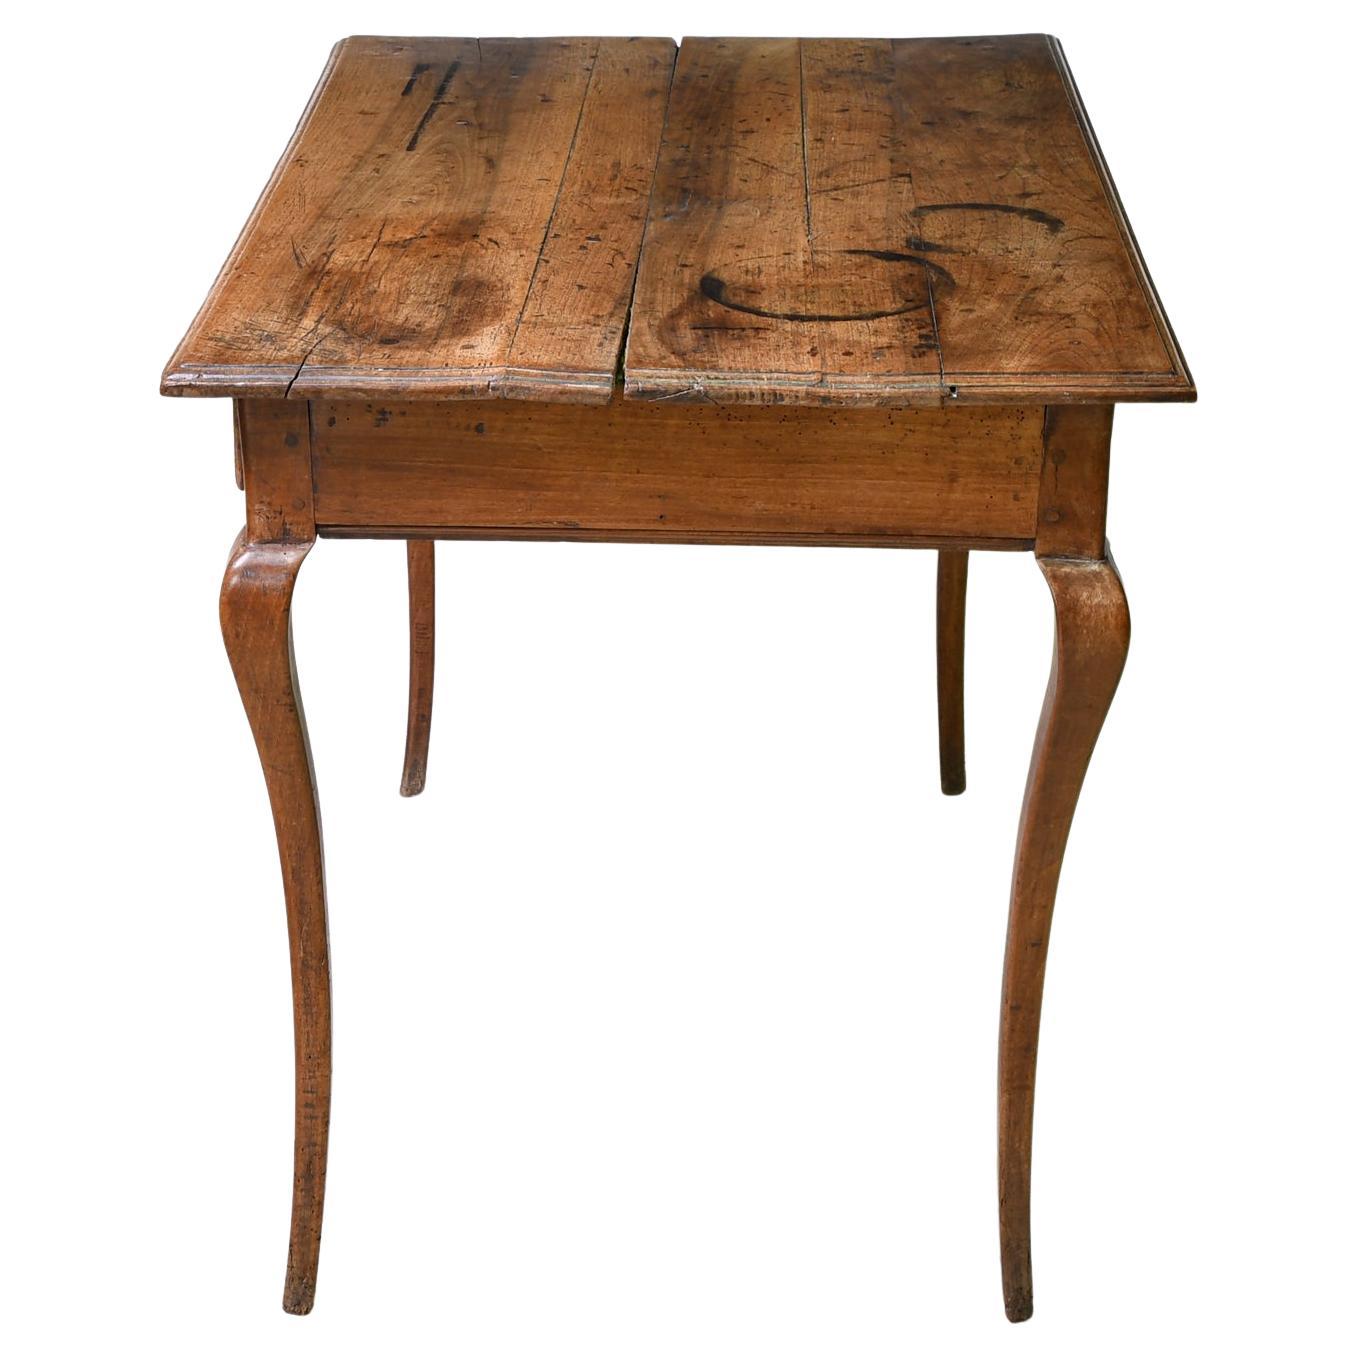 Hand-Crafted French Provincial Cherry Writing Table or Bedside Table with Drawer, circa 1800 For Sale